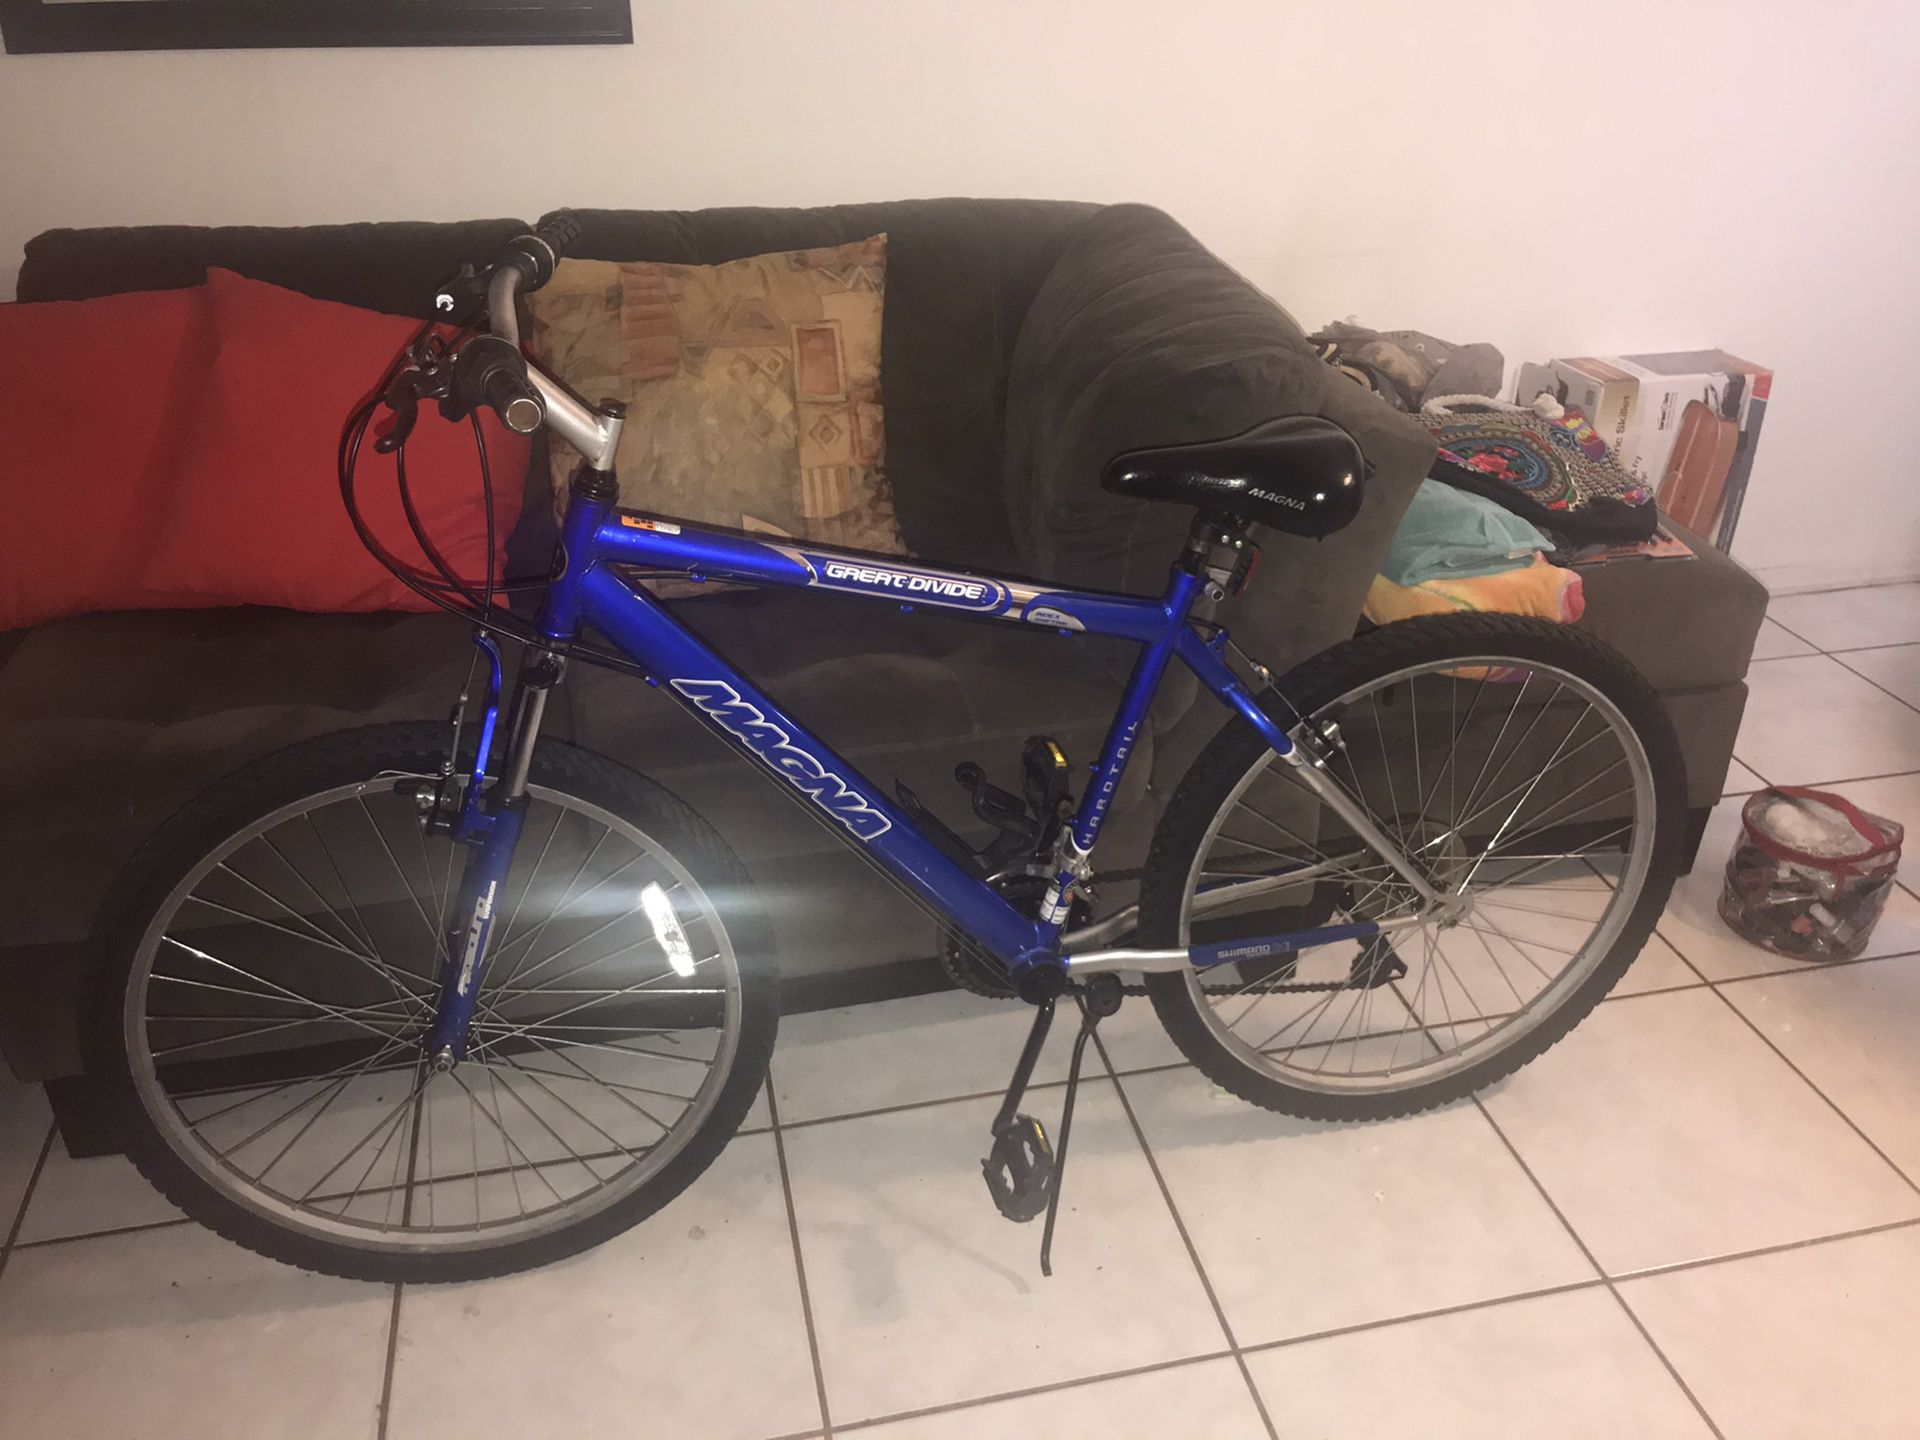 Magna bike 26 for sale in great shape, no issues